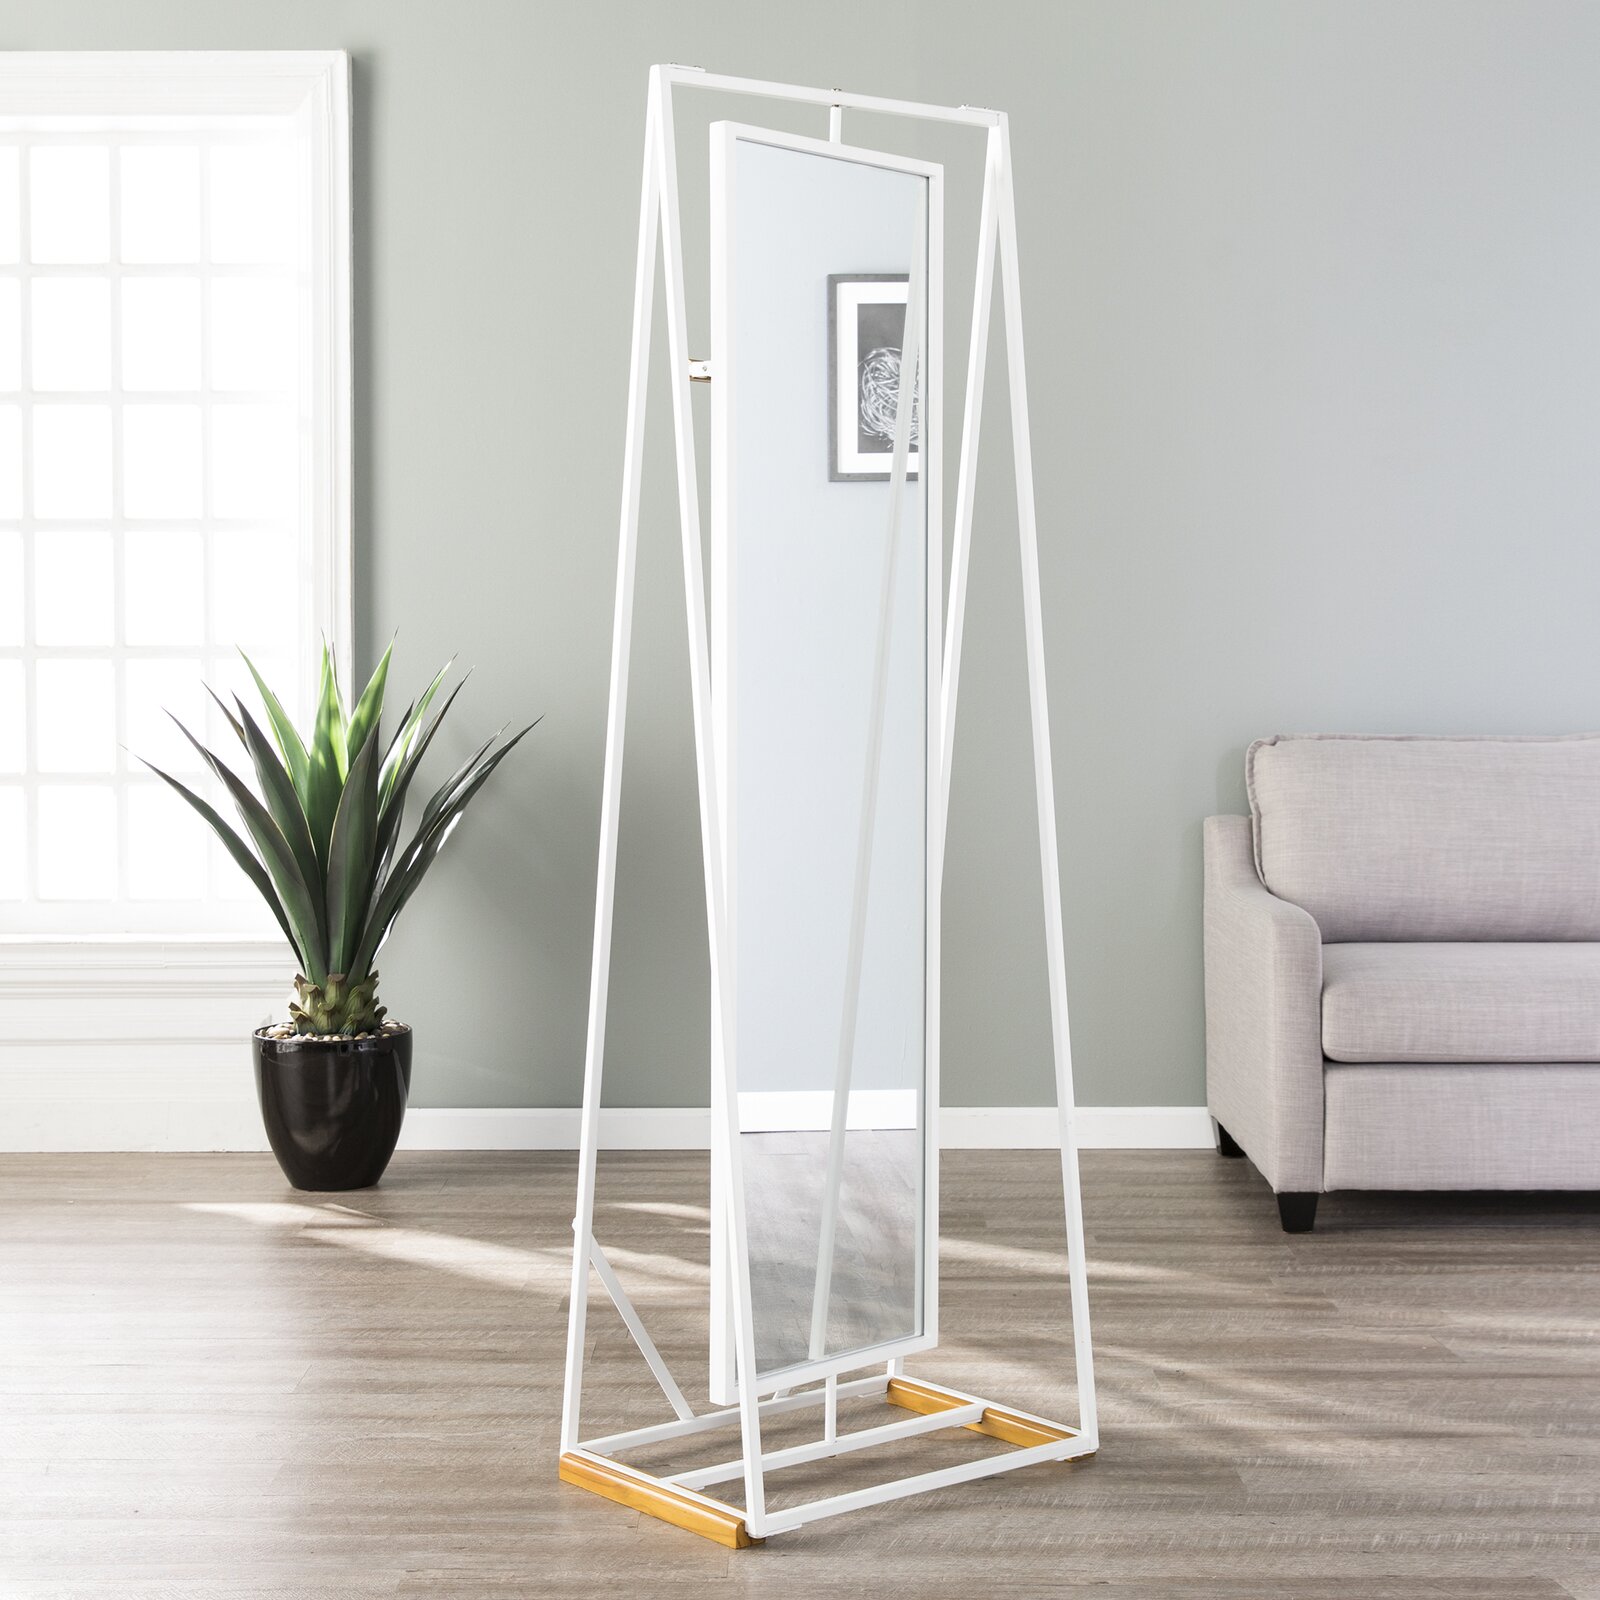 51 Full Length Mirrors To Flatter Your, Freestanding Floor Mirror With Storage